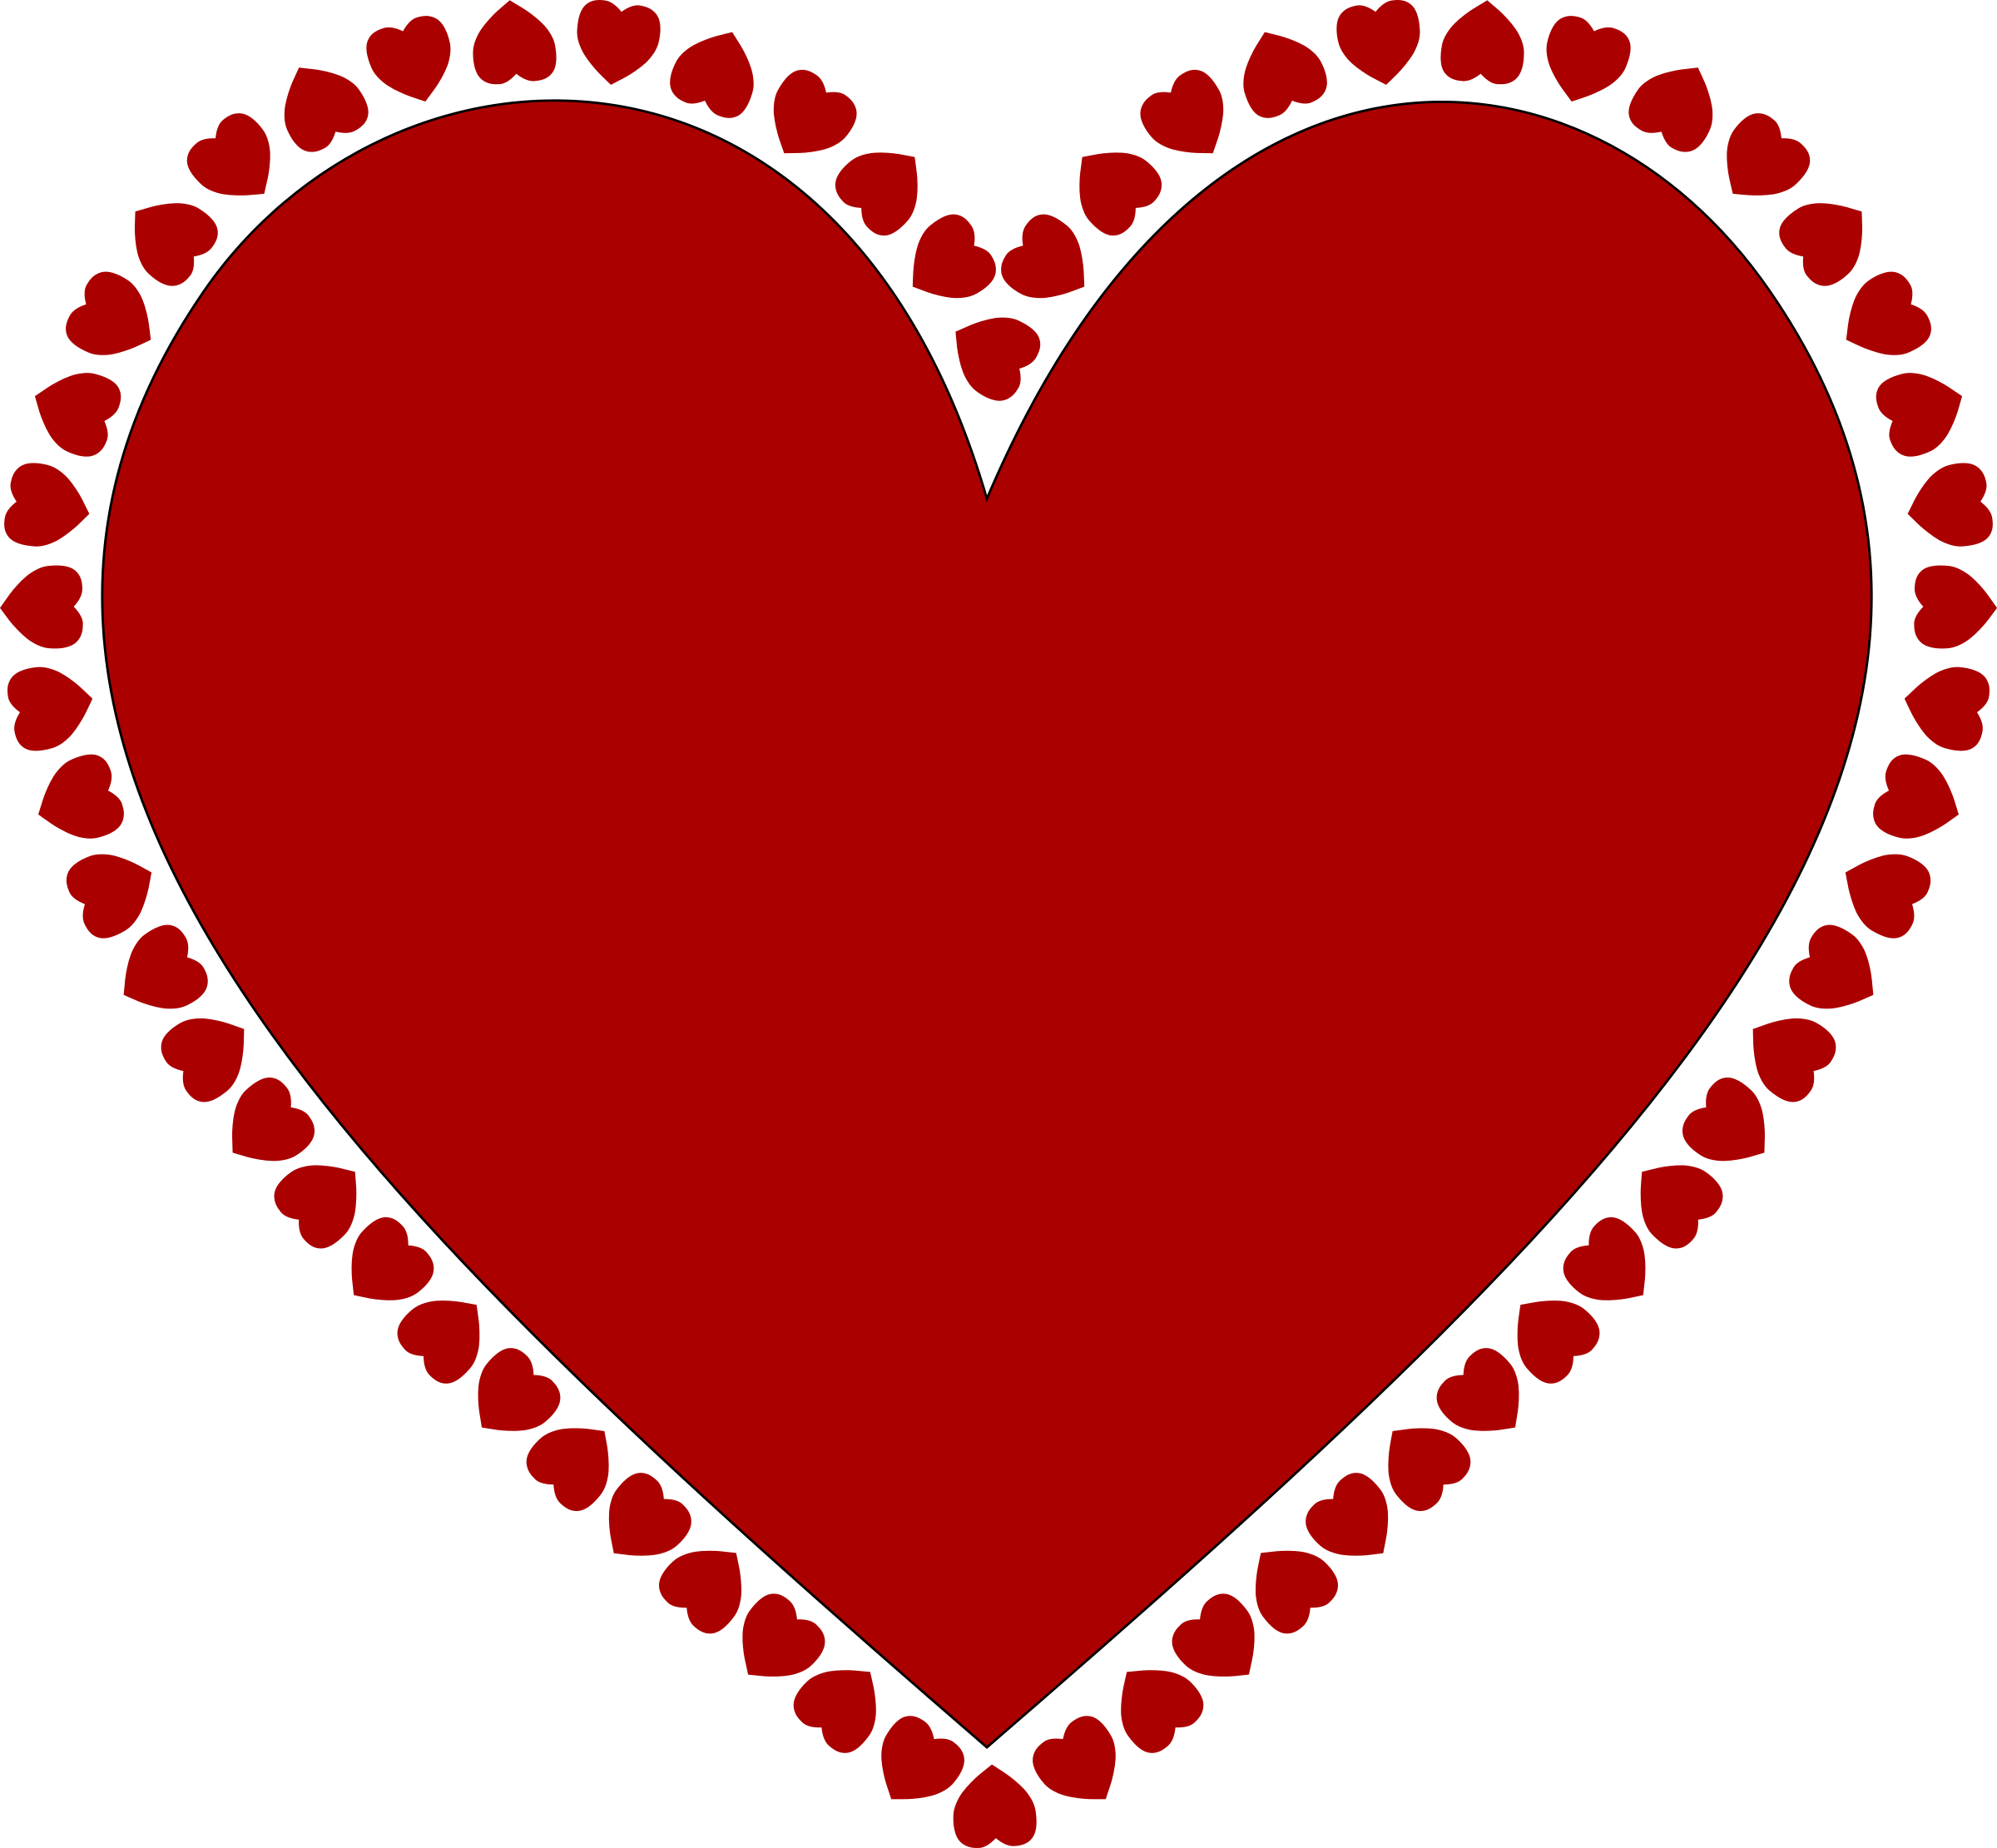 Big Image (Png) - Heart, Transparent background PNG HD thumbnail